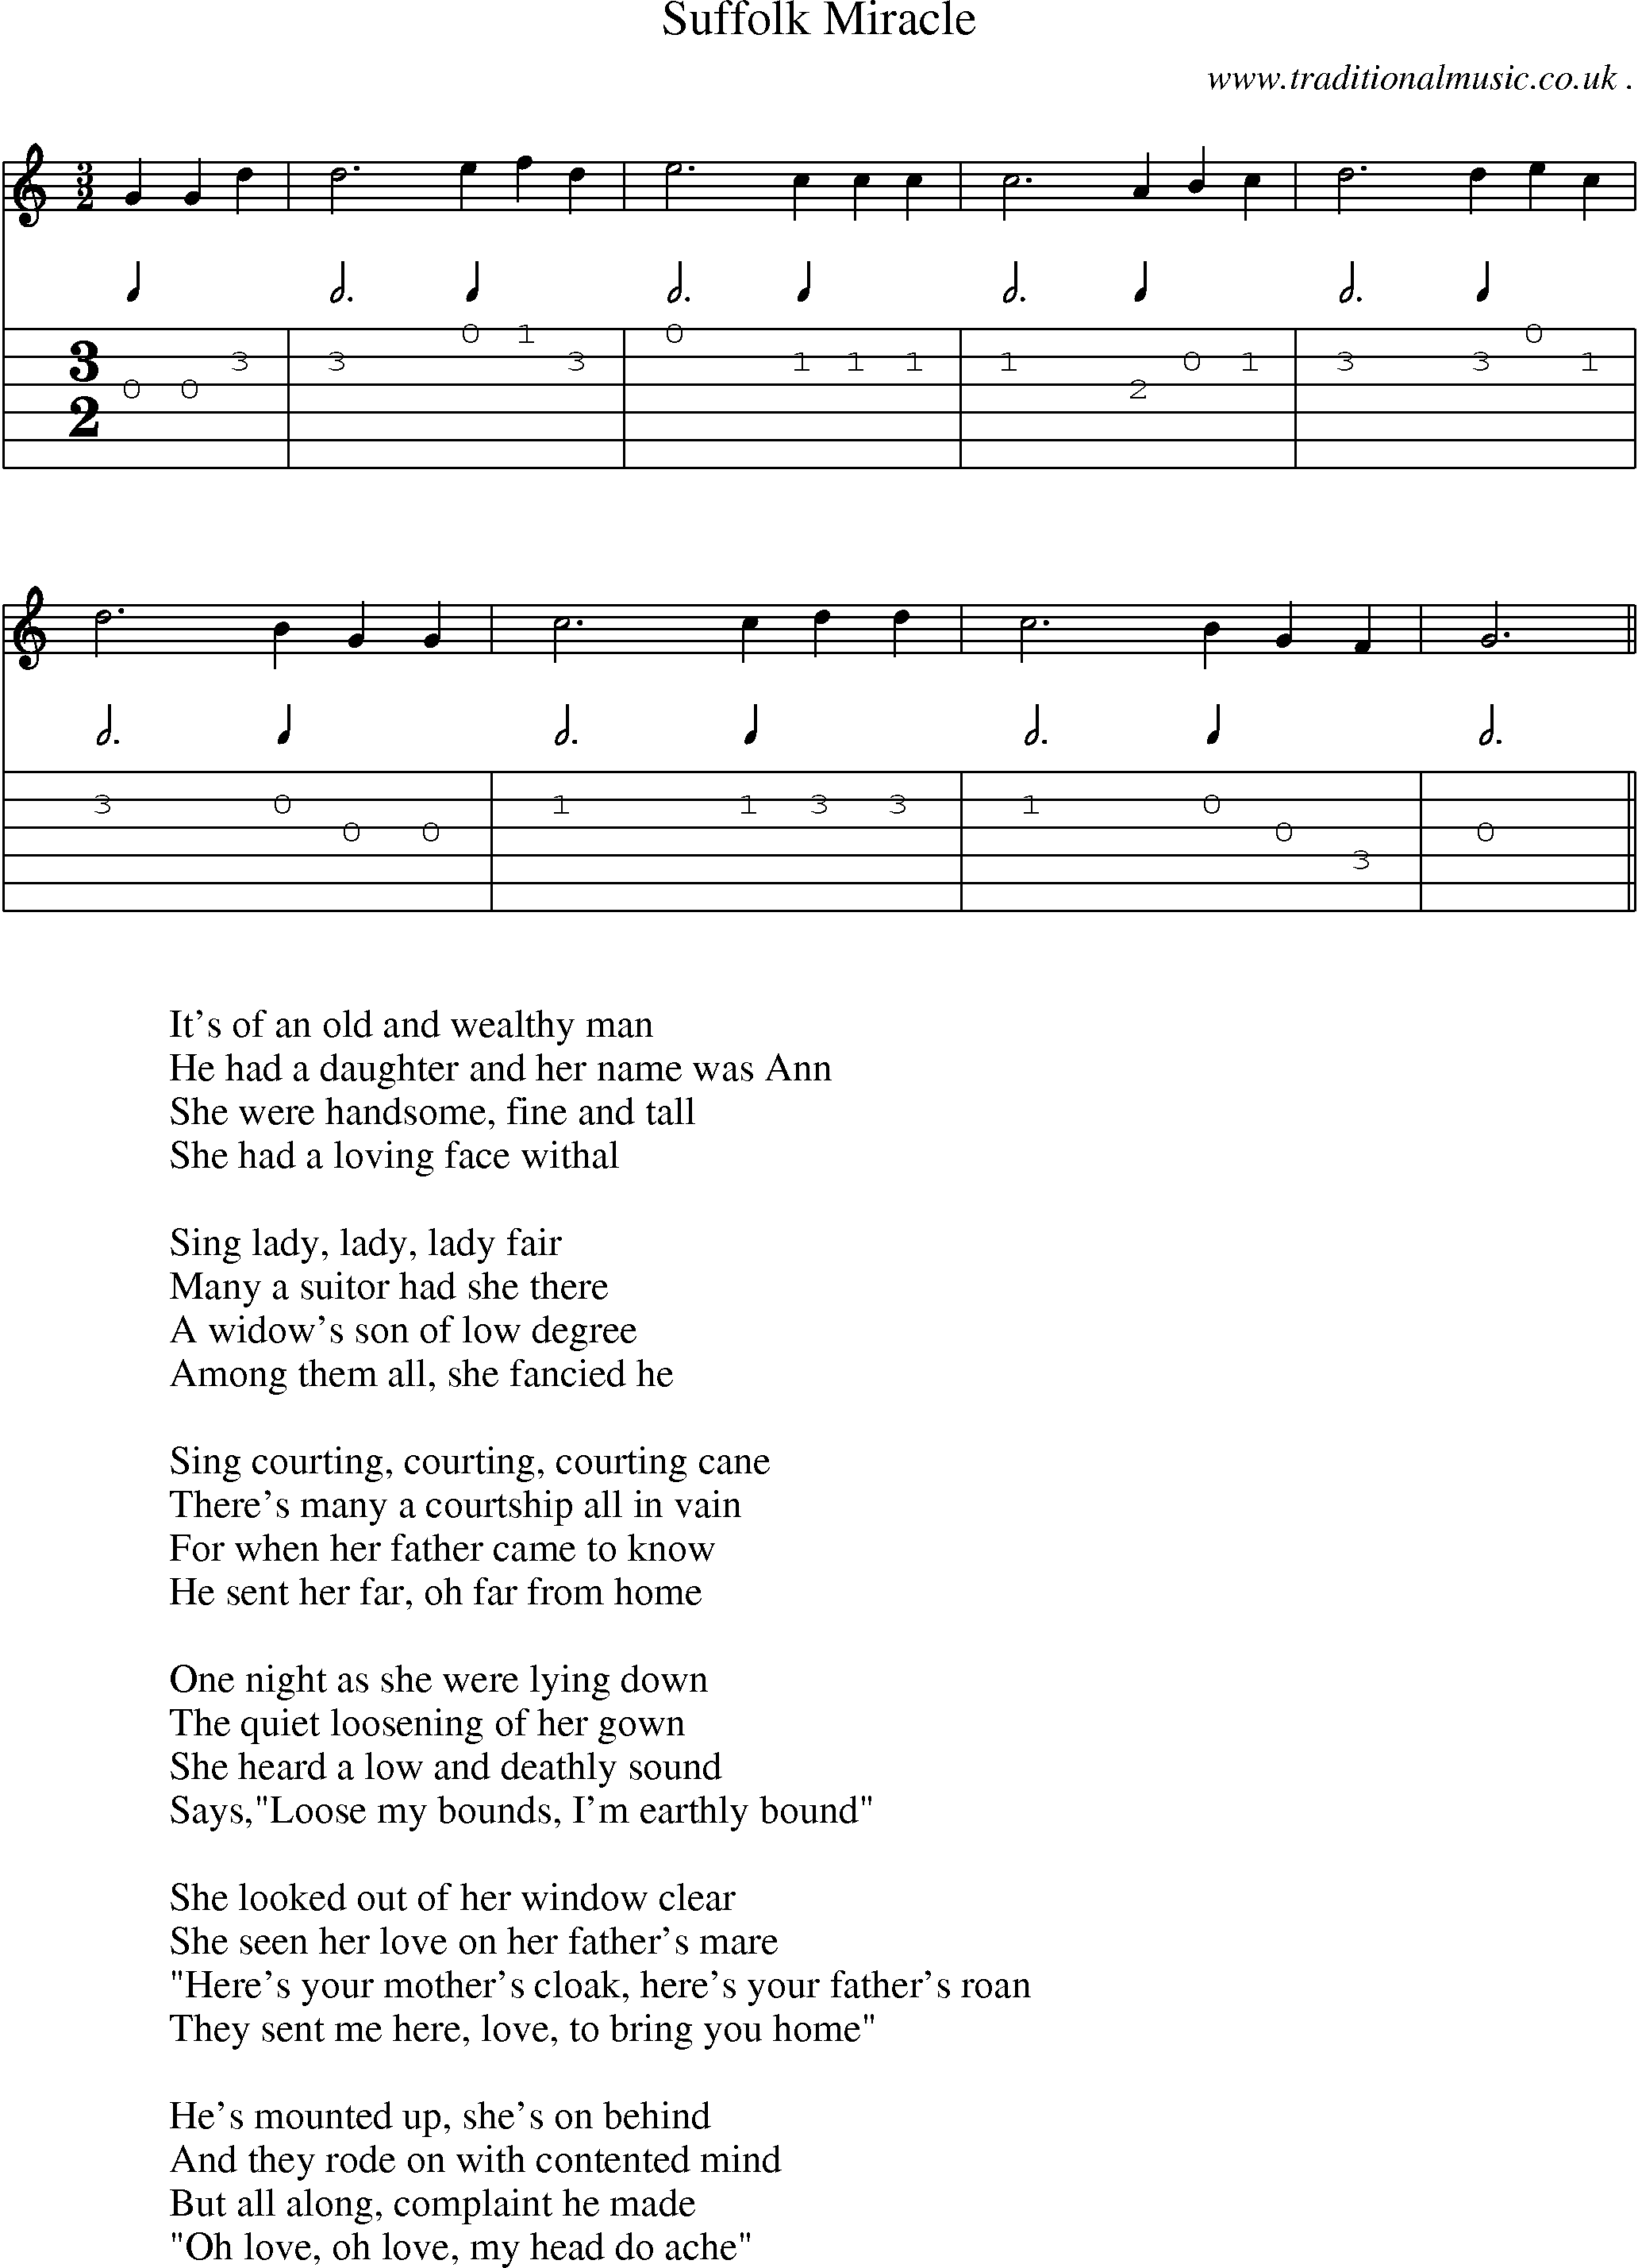 Sheet-Music and Guitar Tabs for Suffolk Miracle